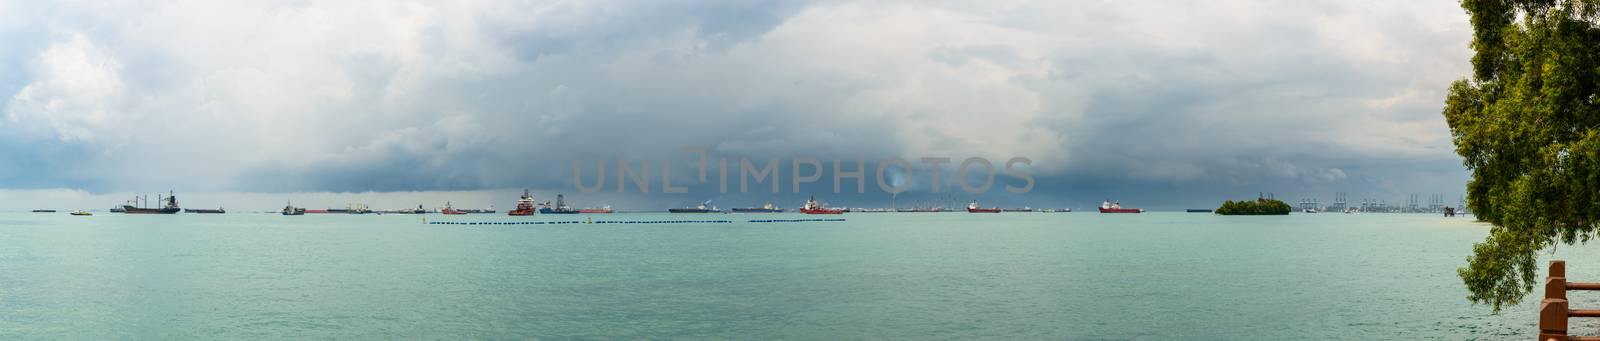 Panoramic view of the Singapore Strait from Sentosa Island. Ships, industrial landscape and stormy weather.